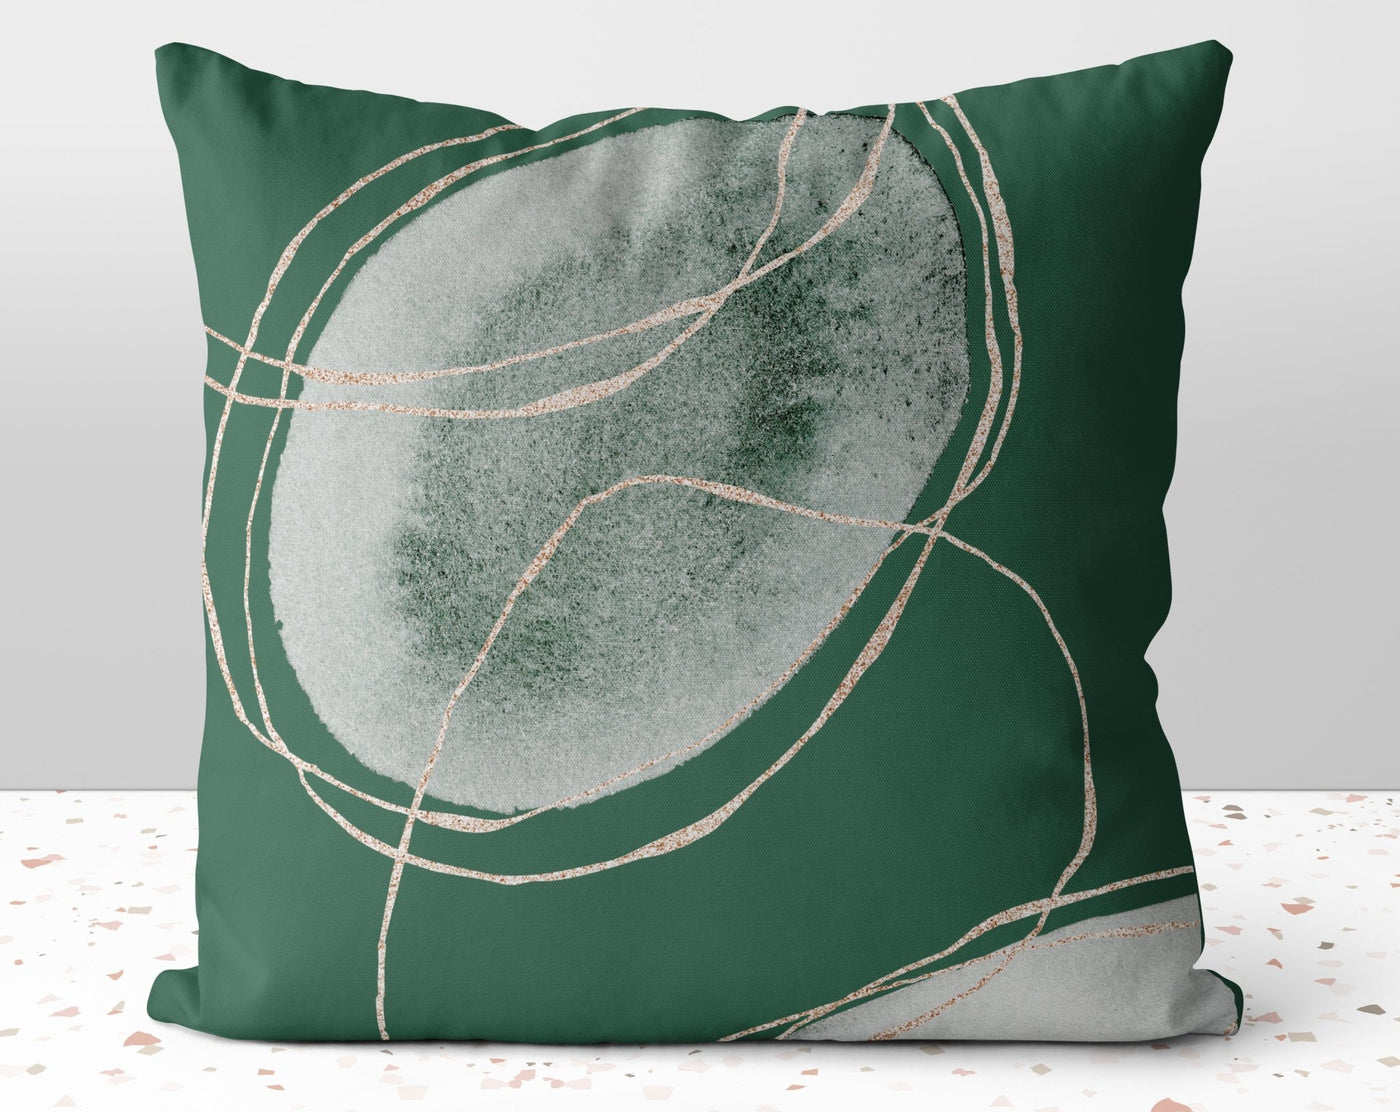 Elegant Chic Circle Pod Jade Green Square Pillow with Gold Printed Accents Pillow Throw Cover